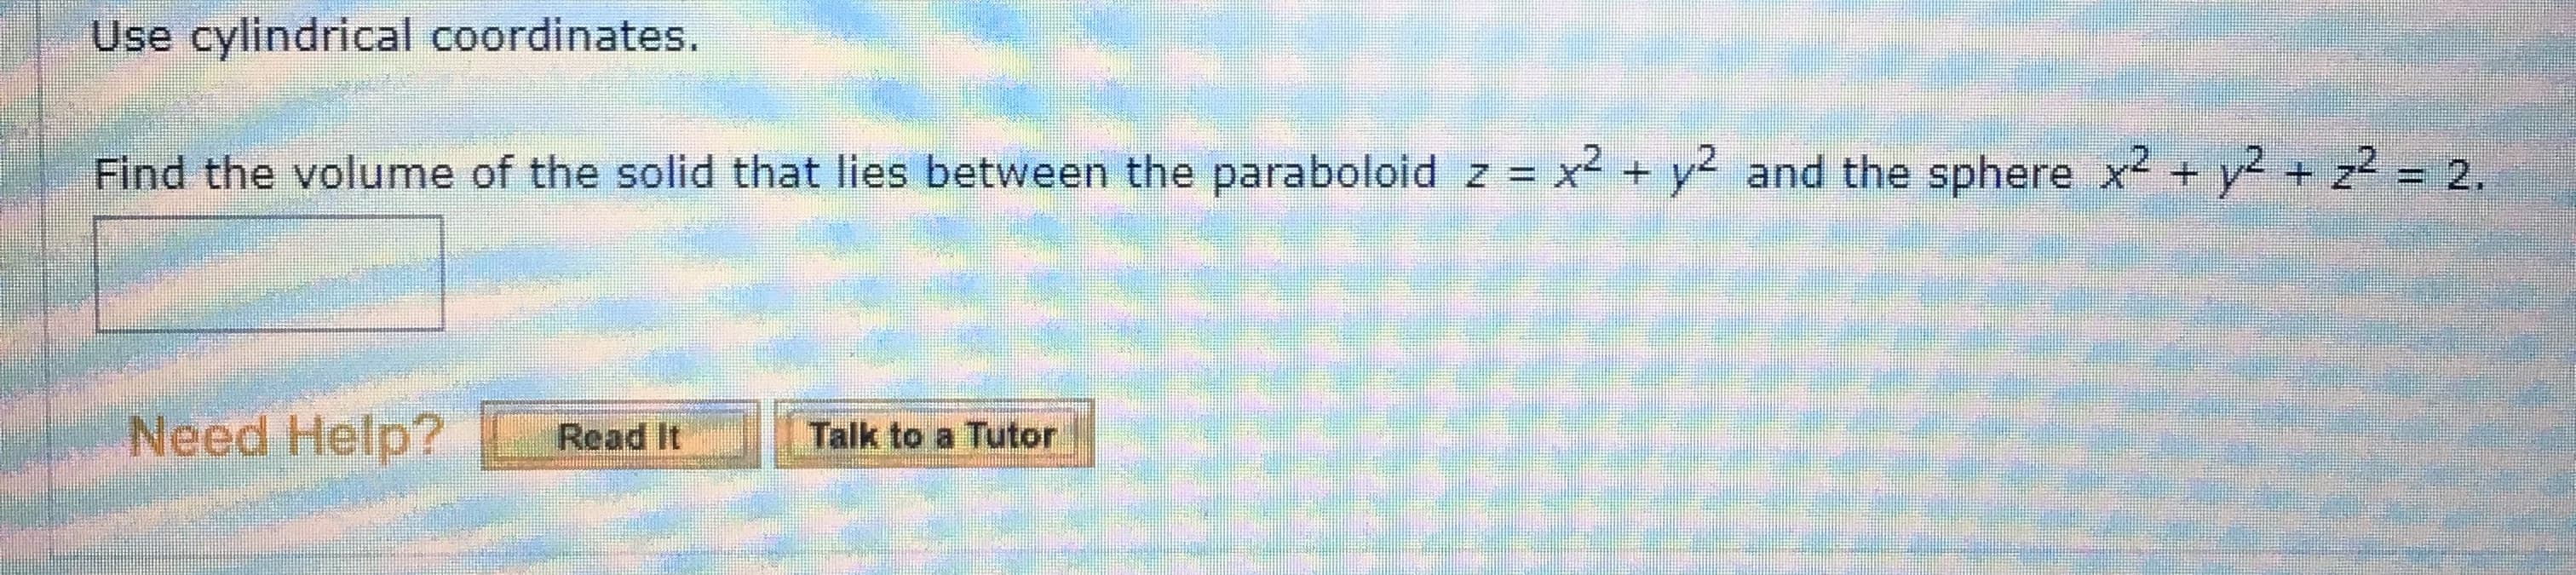 Use cylindrical coordinates.
Find the volume of the solid that lies between the paraboloid z = x² + y and the sphere x + y + z2 = 2.
%3D
Need Help?
Talk to a Tutor
Read It
